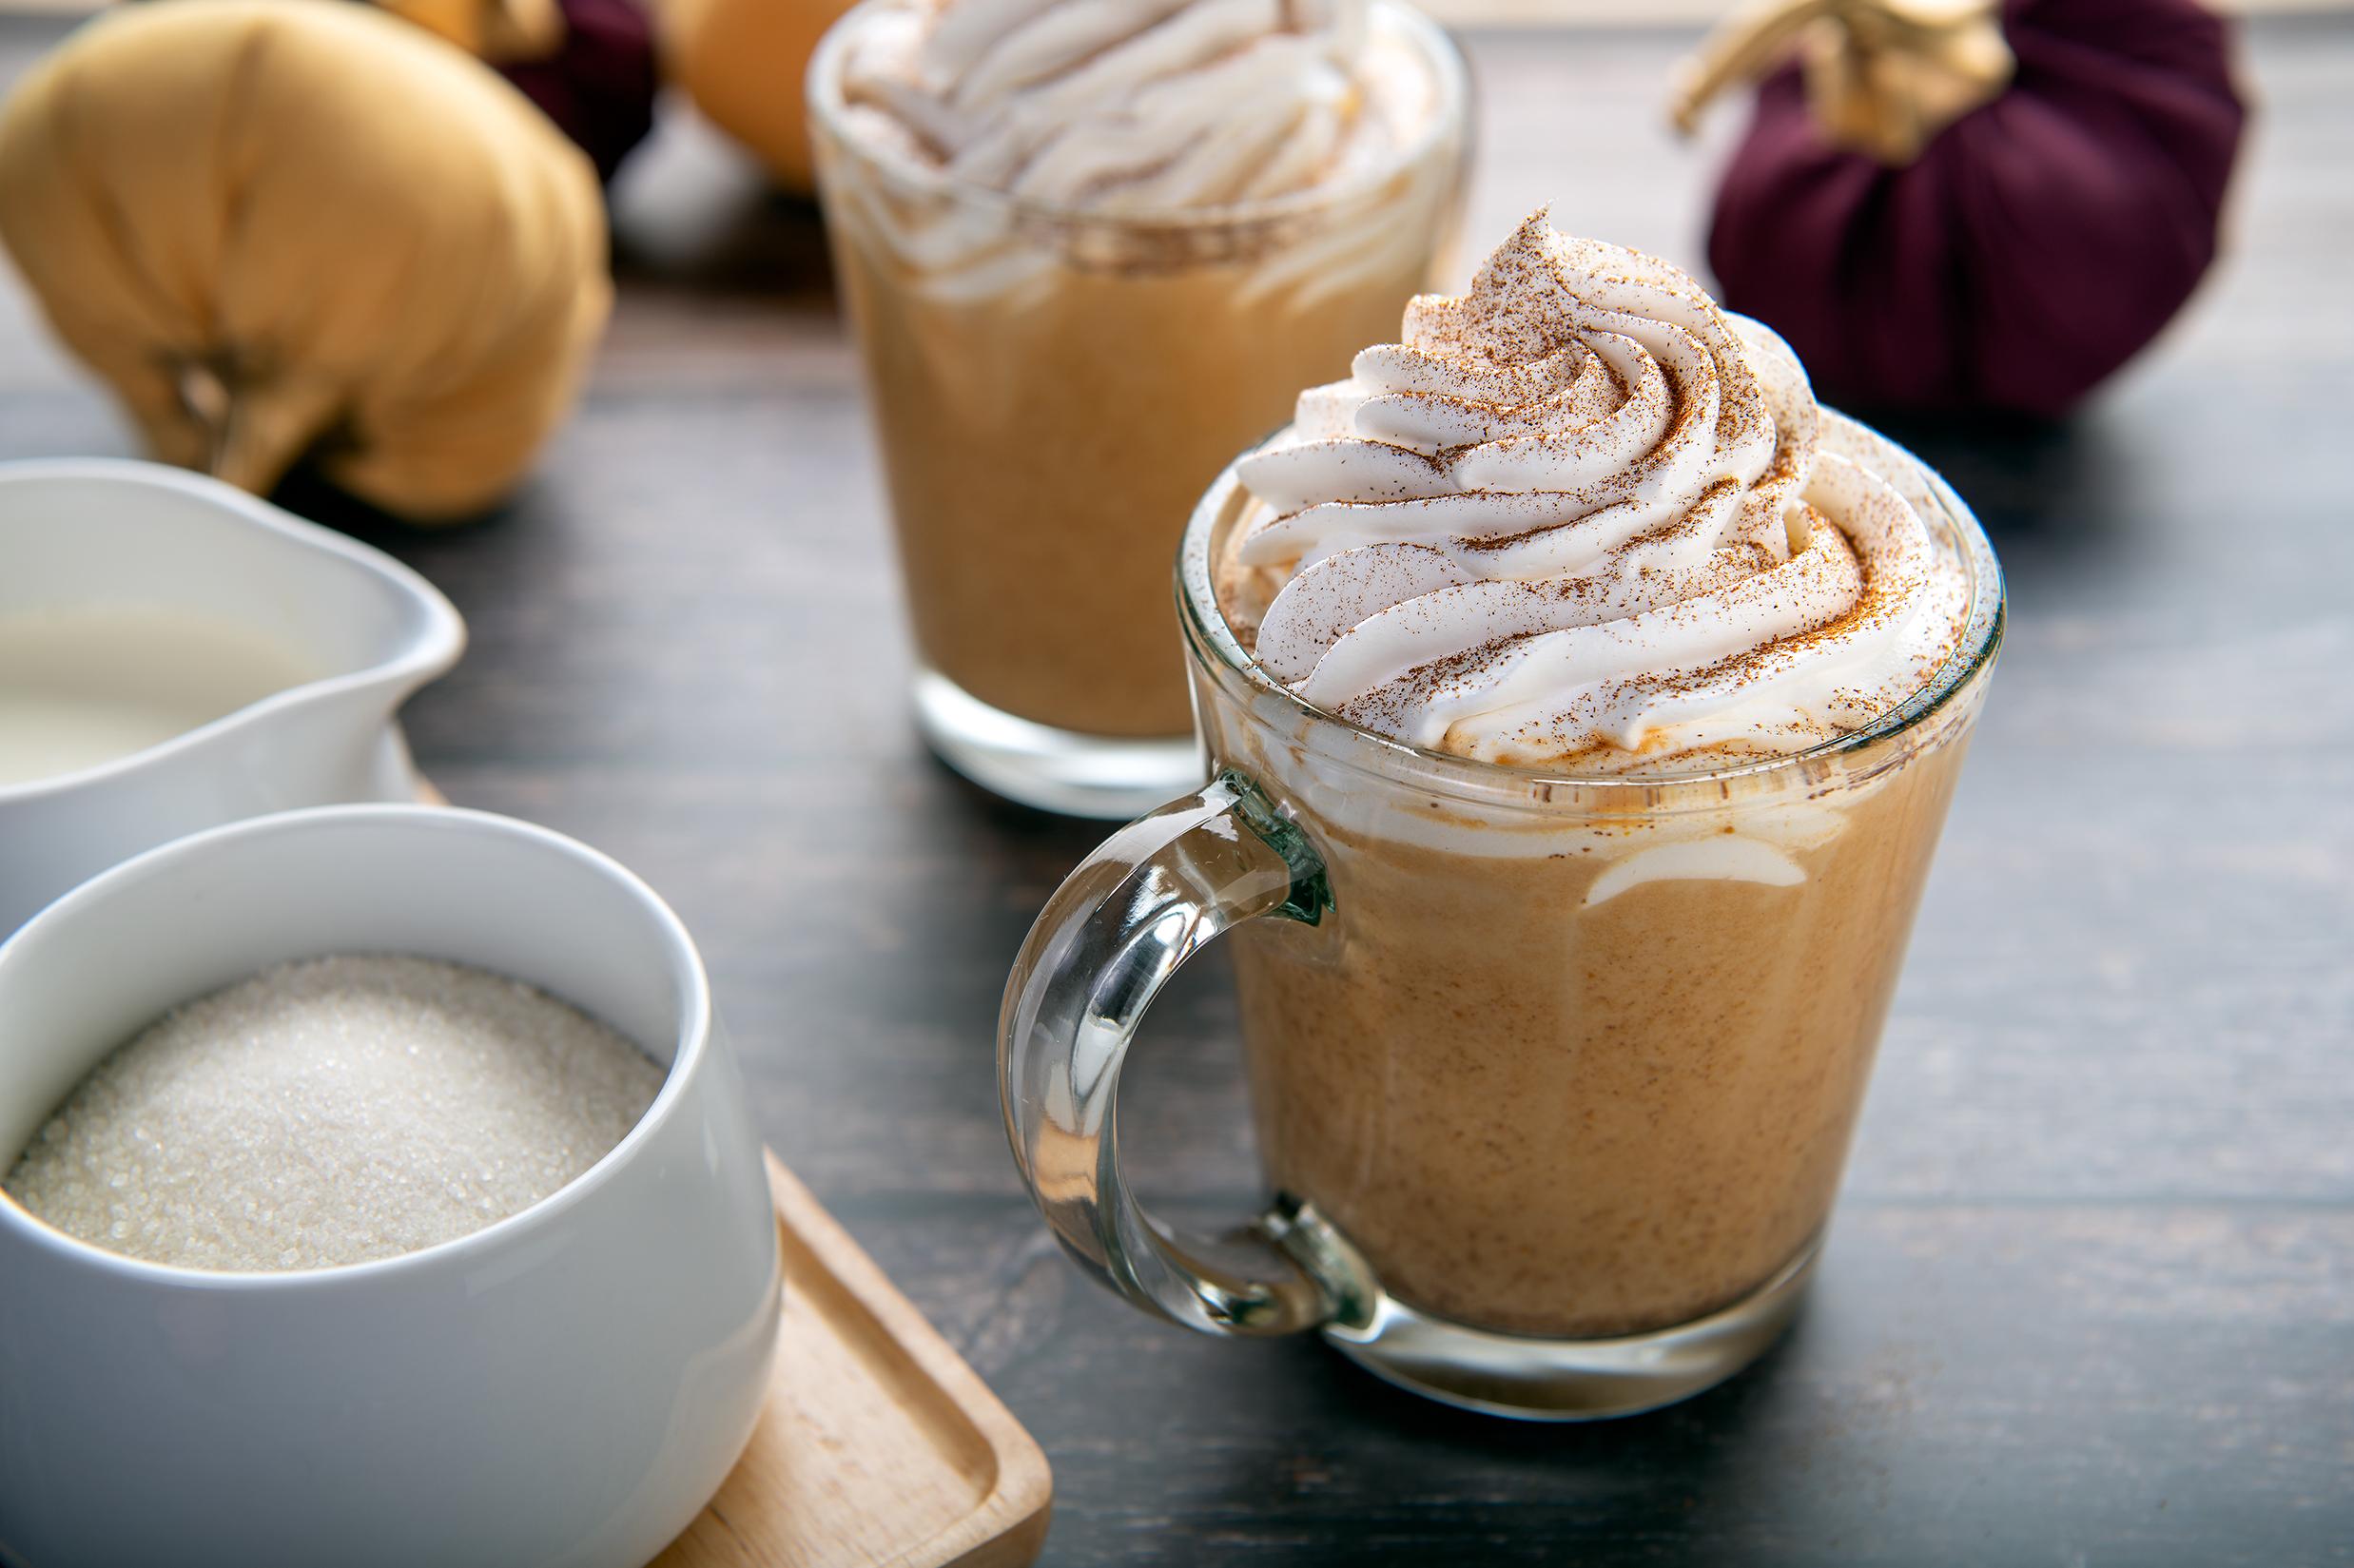  Perfectly blended homemade pumpkin spice syrup makes our latte stand out.